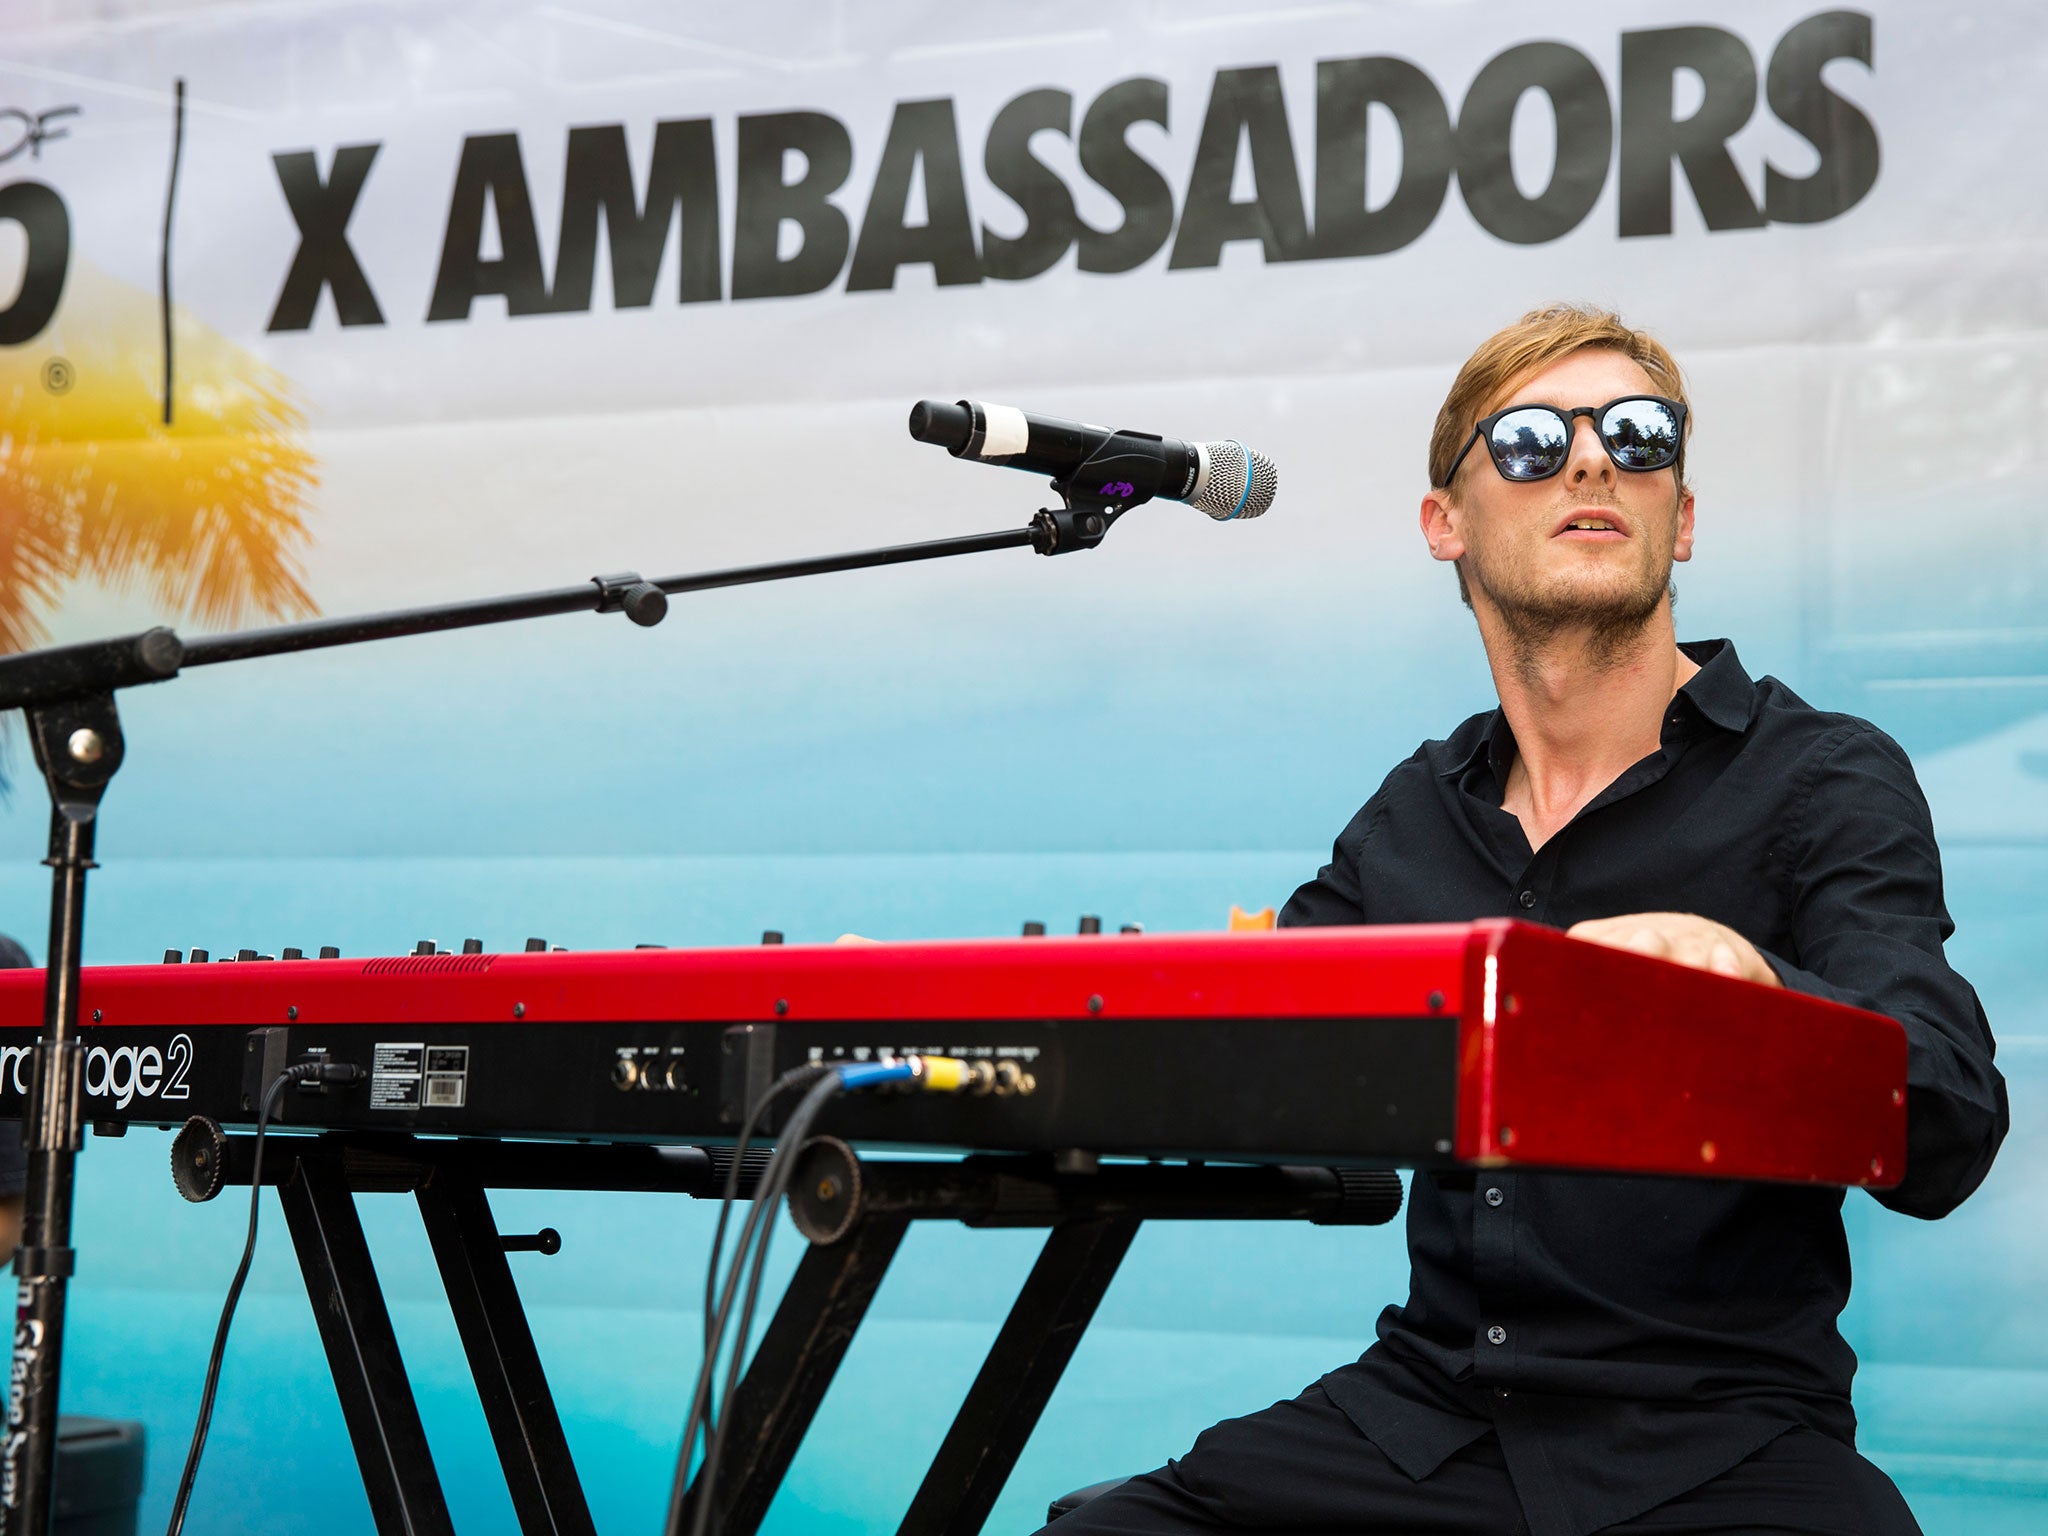 Casey Harris knew he couldn’t be an airline pilot, so joined his brother’s band, X Ambassadors